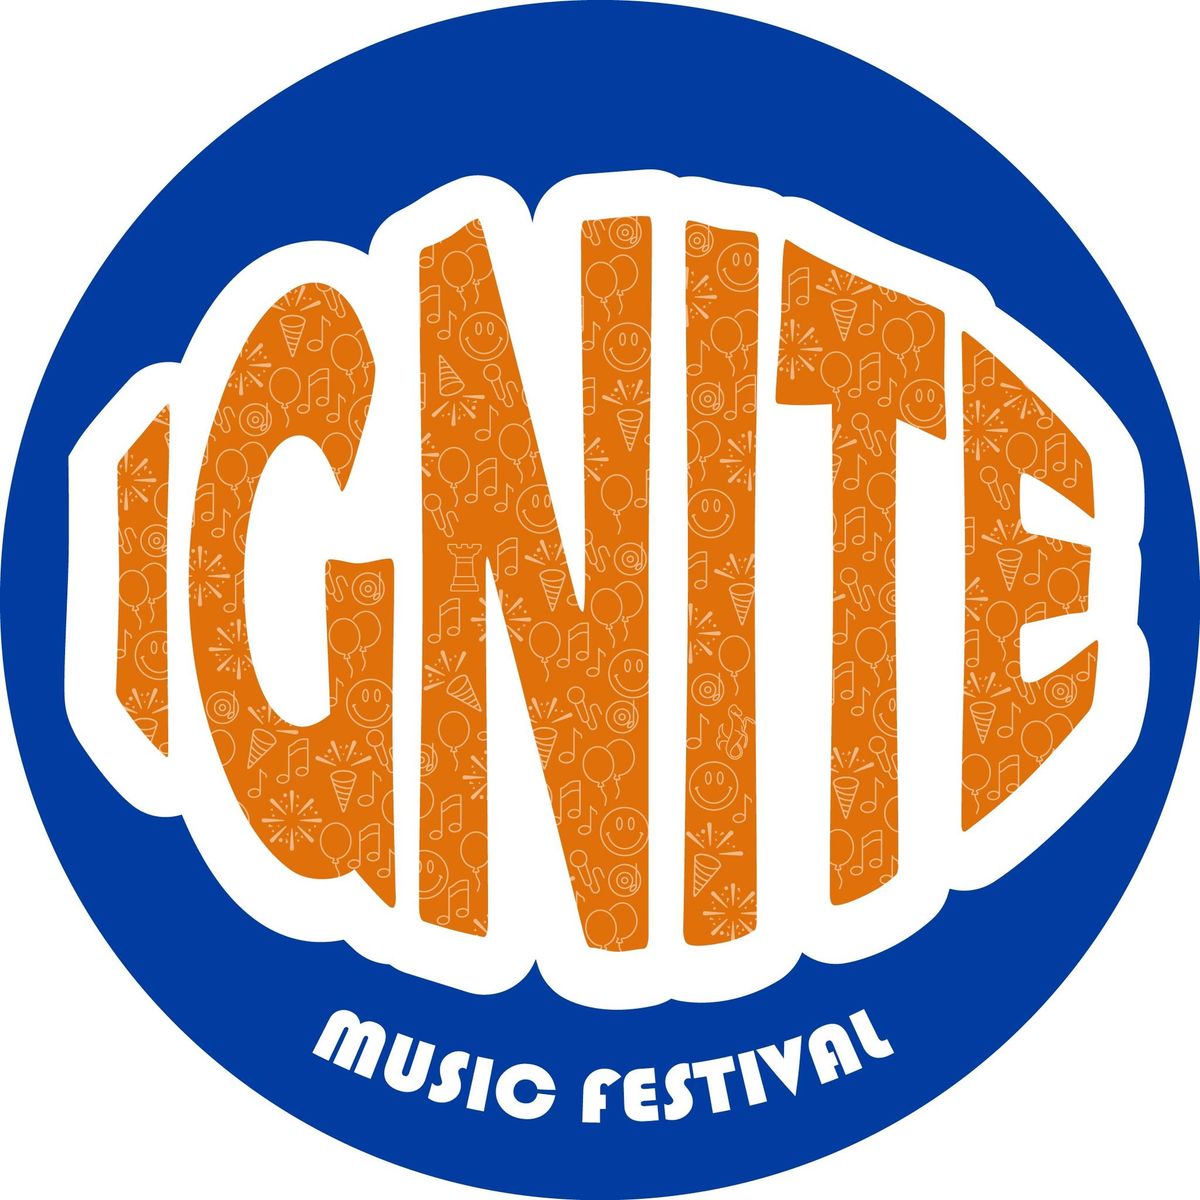 Ignite - Music Festival Fundraiser in aid of Empowering Ethan.